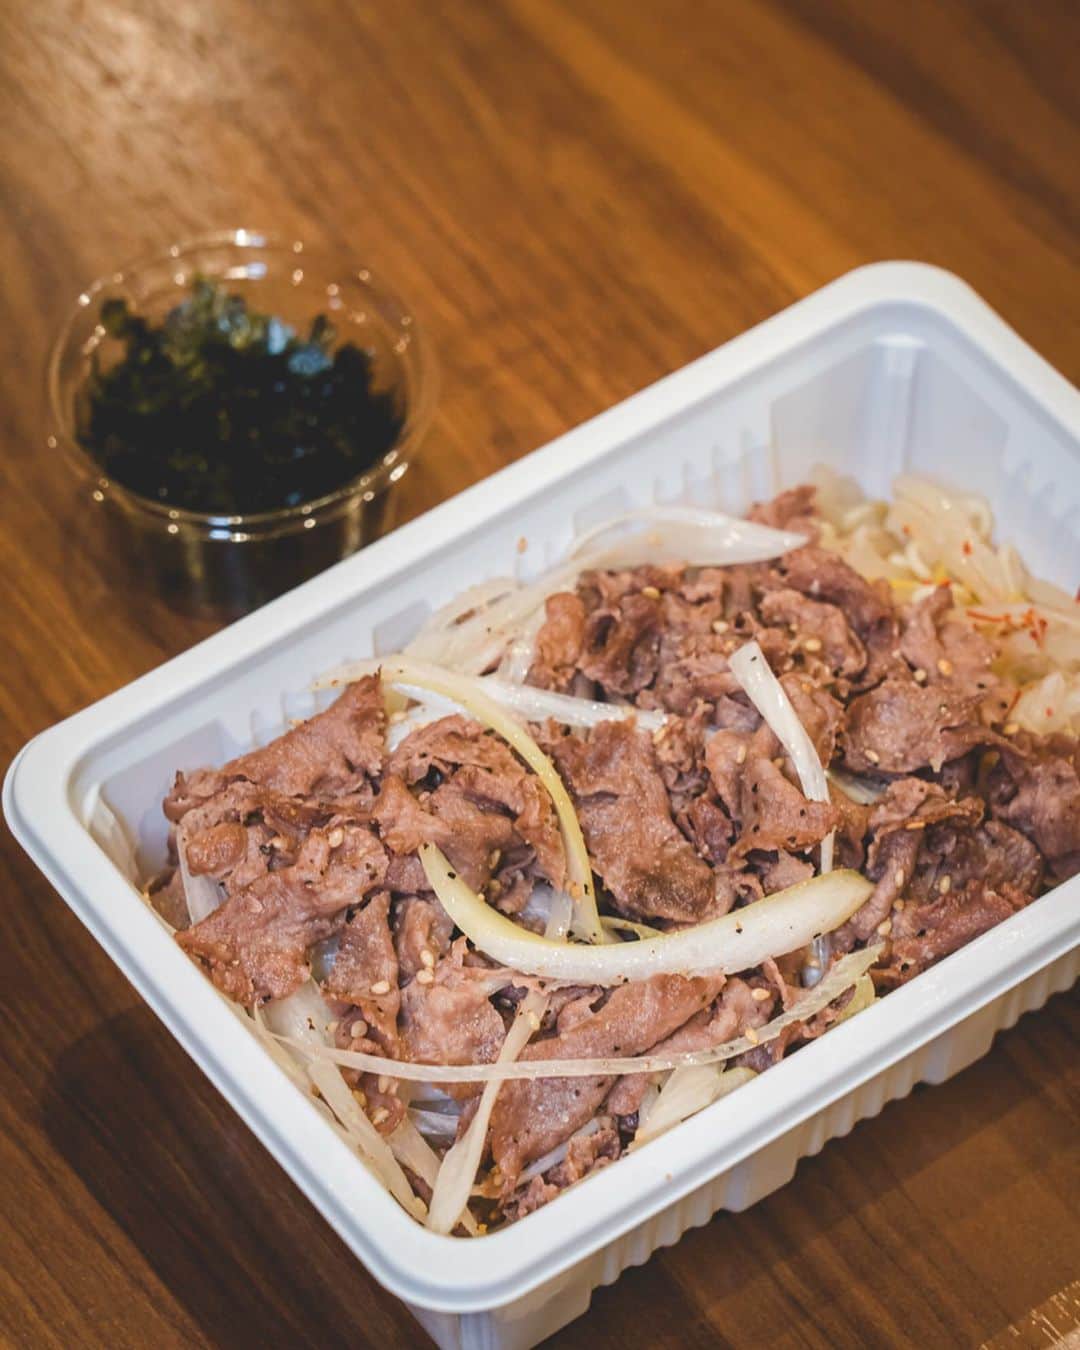 東急電鉄さんのインスタグラム写真 - (東急電鉄Instagram)「. For takeout options, check the Instagram feed here→ @senri1965 . Yakiniku Senri, the 50+ year-old BBQ joint just a 9 min. walk from Komazawa-Daigaku Station, is known for its famous, top-secret house sauce ever since its doors opened. Marinated in this one-of-a-kind flavor, their scrumptious steak is a taste of luxury like none other. Here are the top picks from their special takeout menu: ✔Senri Special Kalbi Bowl ✔Family Set: 600g of Steak w/ Soup and Sides ✔Beef Tongue Bowl The Beef Tongue Bowl pairs perfectly with a hit of salt from nori laver. Available everyday except Mondays and Thursdays. Please order ahead over the phone so staff can best prepare your order. Takeout menu is crafted for you to enjoy upon approval of public health protocols. (Tokyu Den-en-toshi Line Komawaza-Daigaku St.) . ※テイクアウトの詳細についてはInstagramの投稿からご確認ください。→ @senri1965 . 駒沢大学駅から徒歩9分、創業50年以上の老舗「焼肉千里」 創業より守り続けた”門外不出の秘伝のタレ”が特徴。 そのタレをもみ込んで漬けたお肉をはじめここでしか味わえない逸品を豊富にご用意しています。 現在、お店ではテイクアウト限定メニューの販売をしています。 ✔千里の特製カルビ丼 ✔お肉600グラムに惣菜・スープがついたファミリーセット ✔タン丼（韓国刻み海苔添え） タン丼は海苔の塩加減との相性が抜群です。 定休日は月曜日と木曜日。事前にお電話でご注文いただければスムーズにお受け取りできます。また、テイクアウトメニューは全て保健所の許可を得て販売をしていますので安心してお召し上がりください。 （東急田園都市線　駒沢大学駅） . #tokyo #japan #japanlife #lifeinjapan #tokyolife #thisisjapan #japanlife #grilledmeat #japanesefood #焼肉千里 #千里 #焼肉 #焼き肉 #肉#牛タン #弁当 #テイクアウト #焼肉弁当 #駒沢 #駒沢グルメ #駒沢グルメテイクアウト #テイクアウトグルメ #テイクアウトランチ #お持ち帰り #持ち帰り #テイクアウト #おうち時間 #おうちで過ごそう」5月21日 10時48分 - tokyu_railways